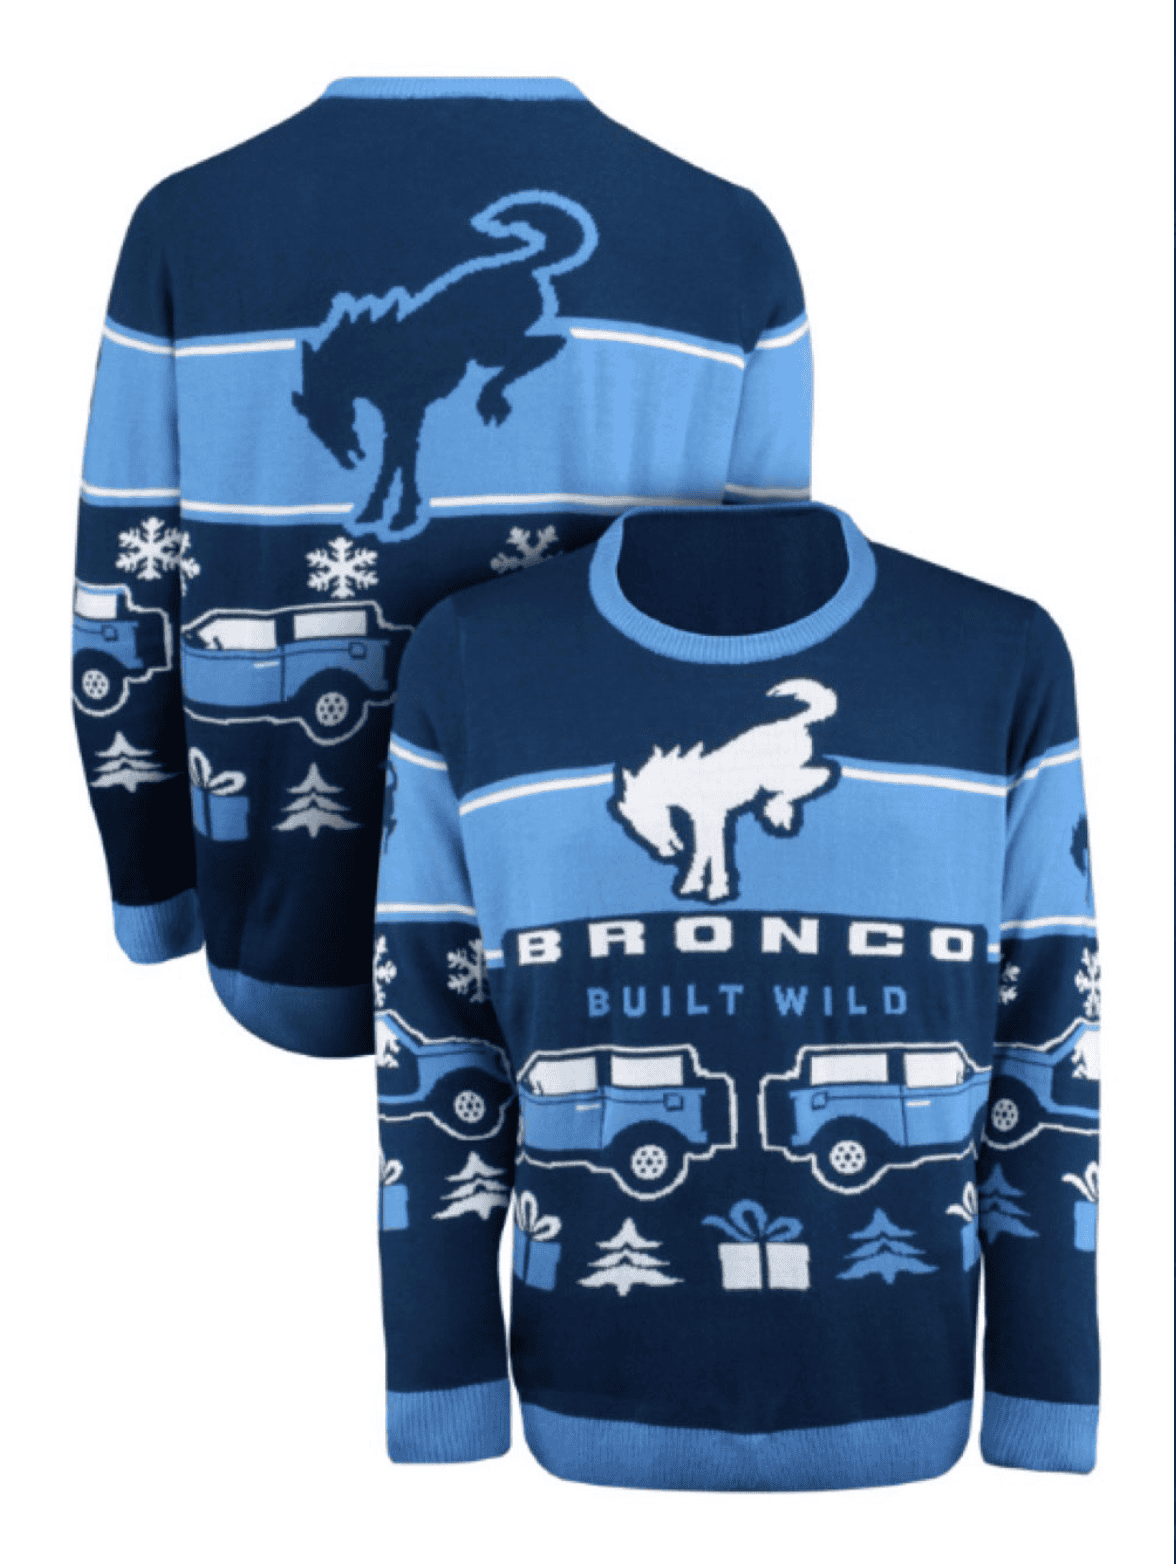 Ford Bronco The Holiday Bronco Sweater Is Here! cut